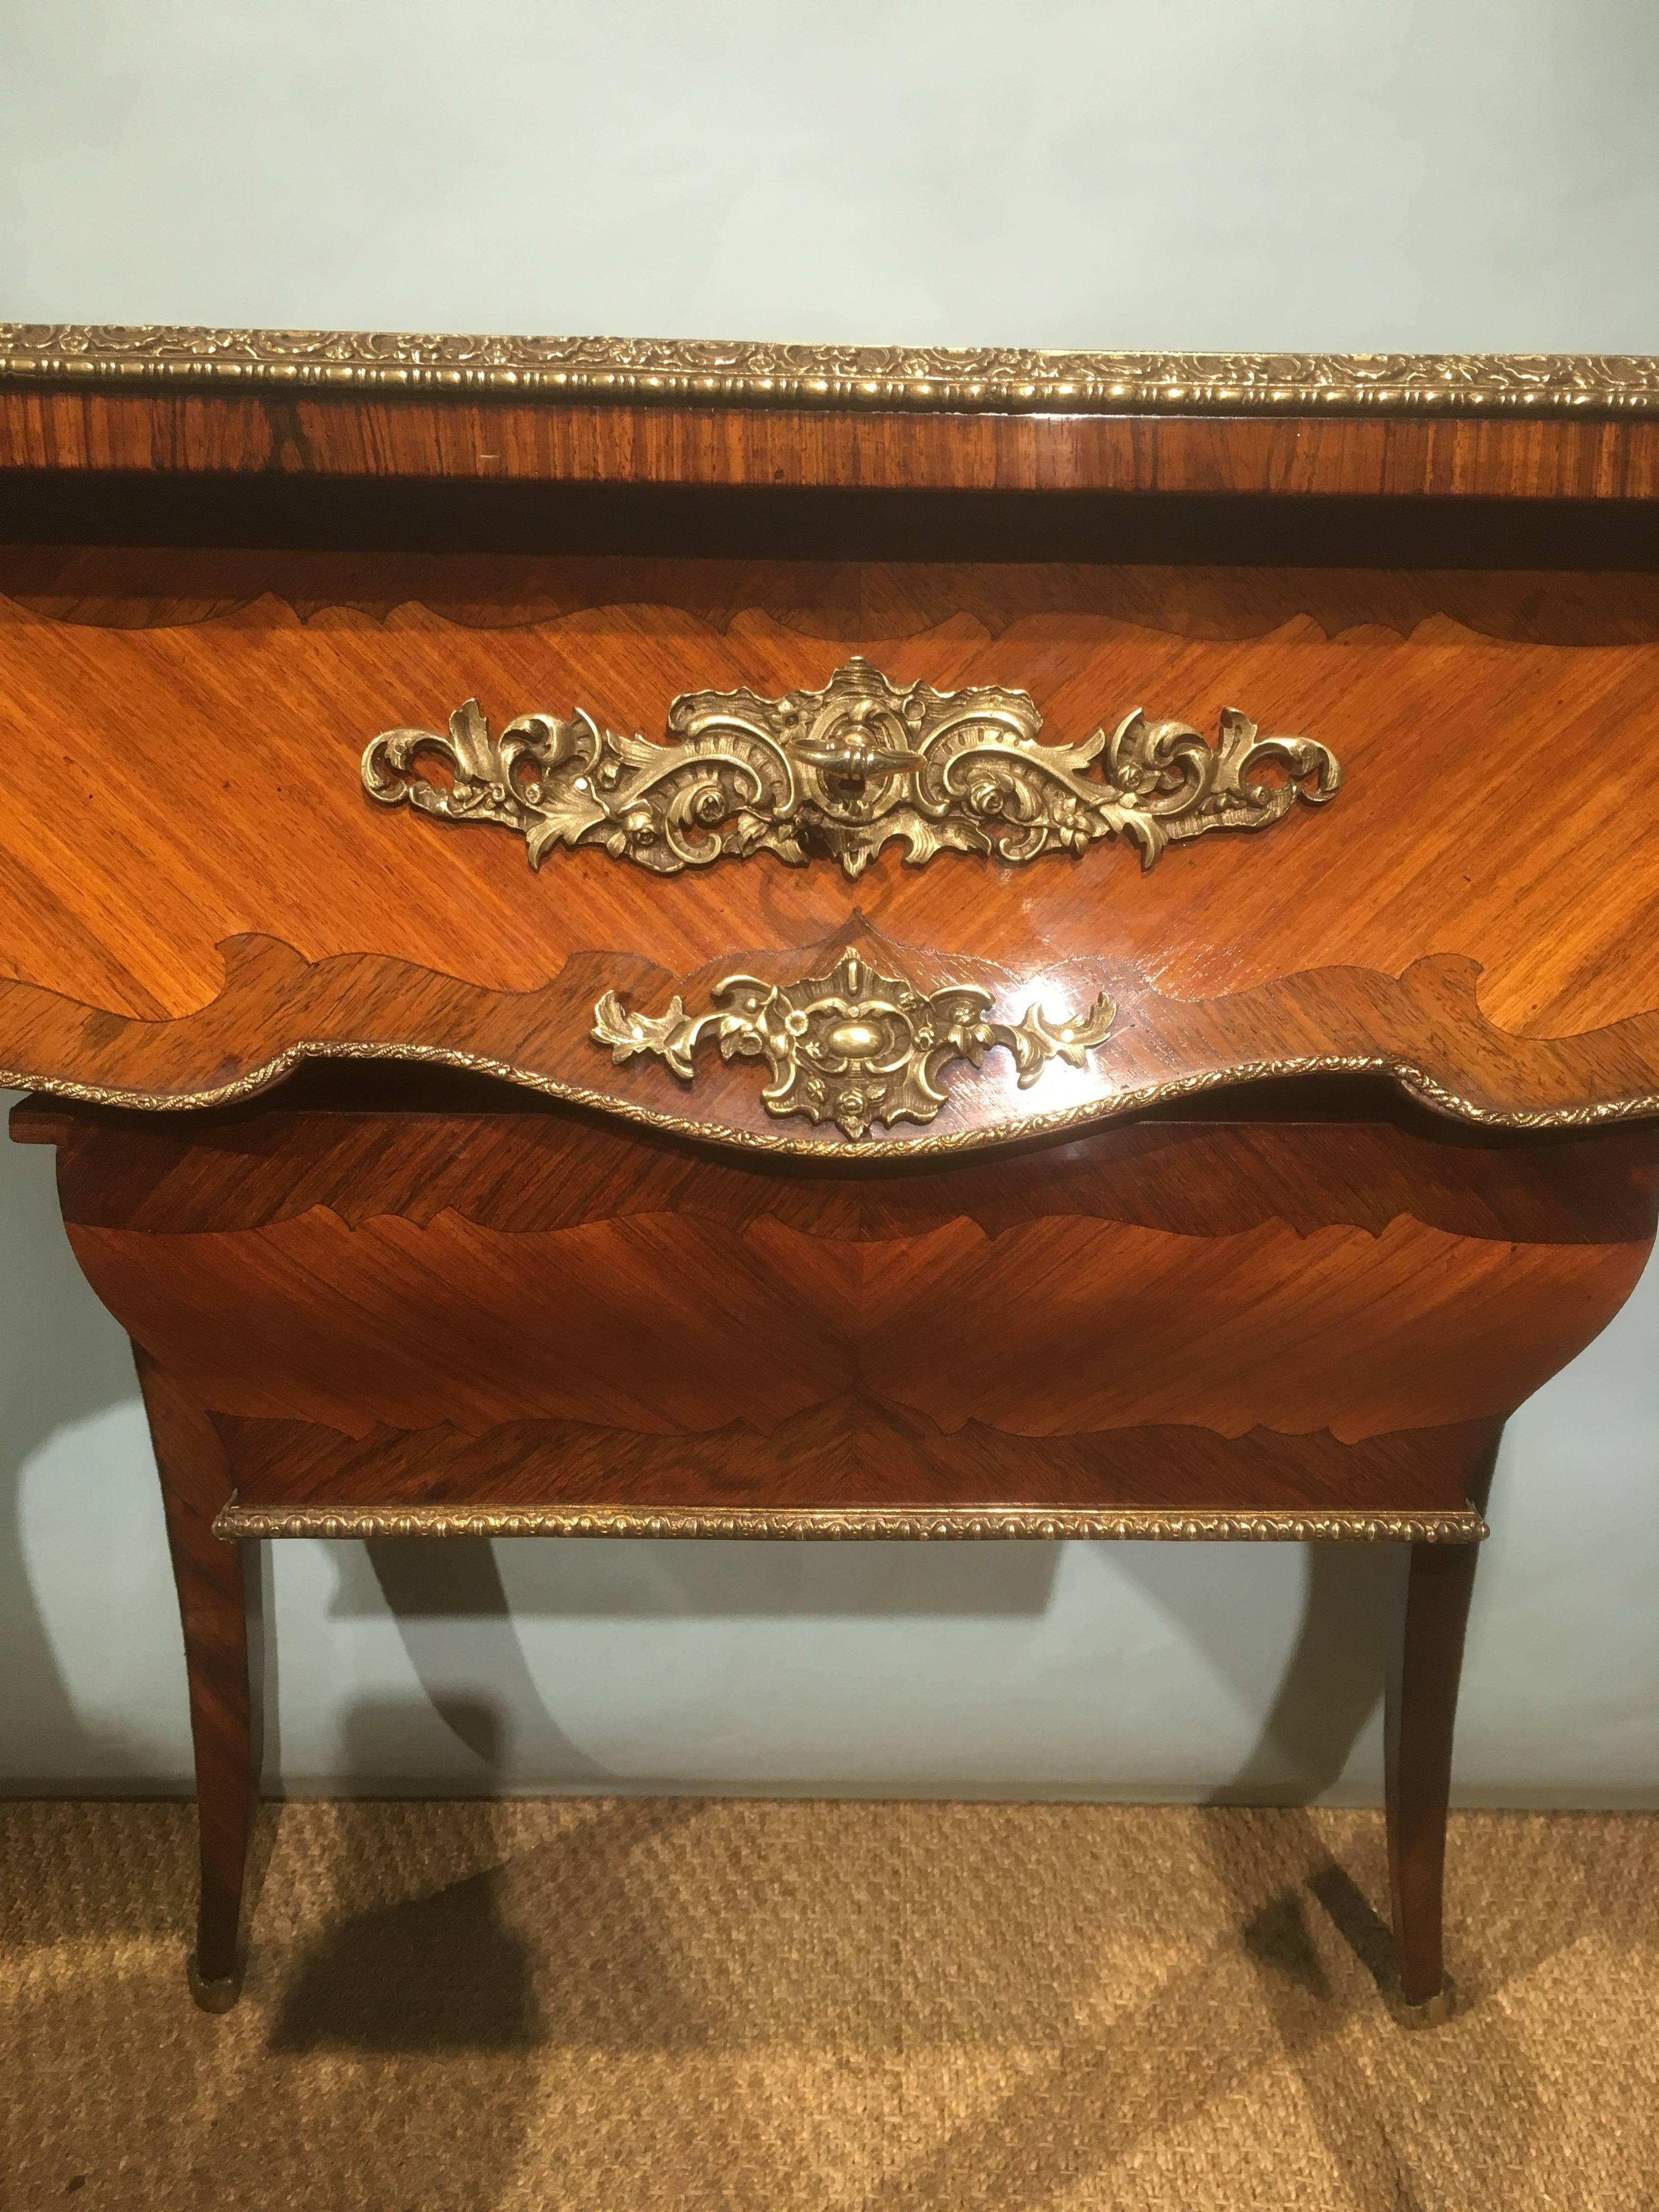 Very fine 19th century king wood dressing table or work table banded with figured wall and having original ormolu mounts 

Although unsigned this is a 